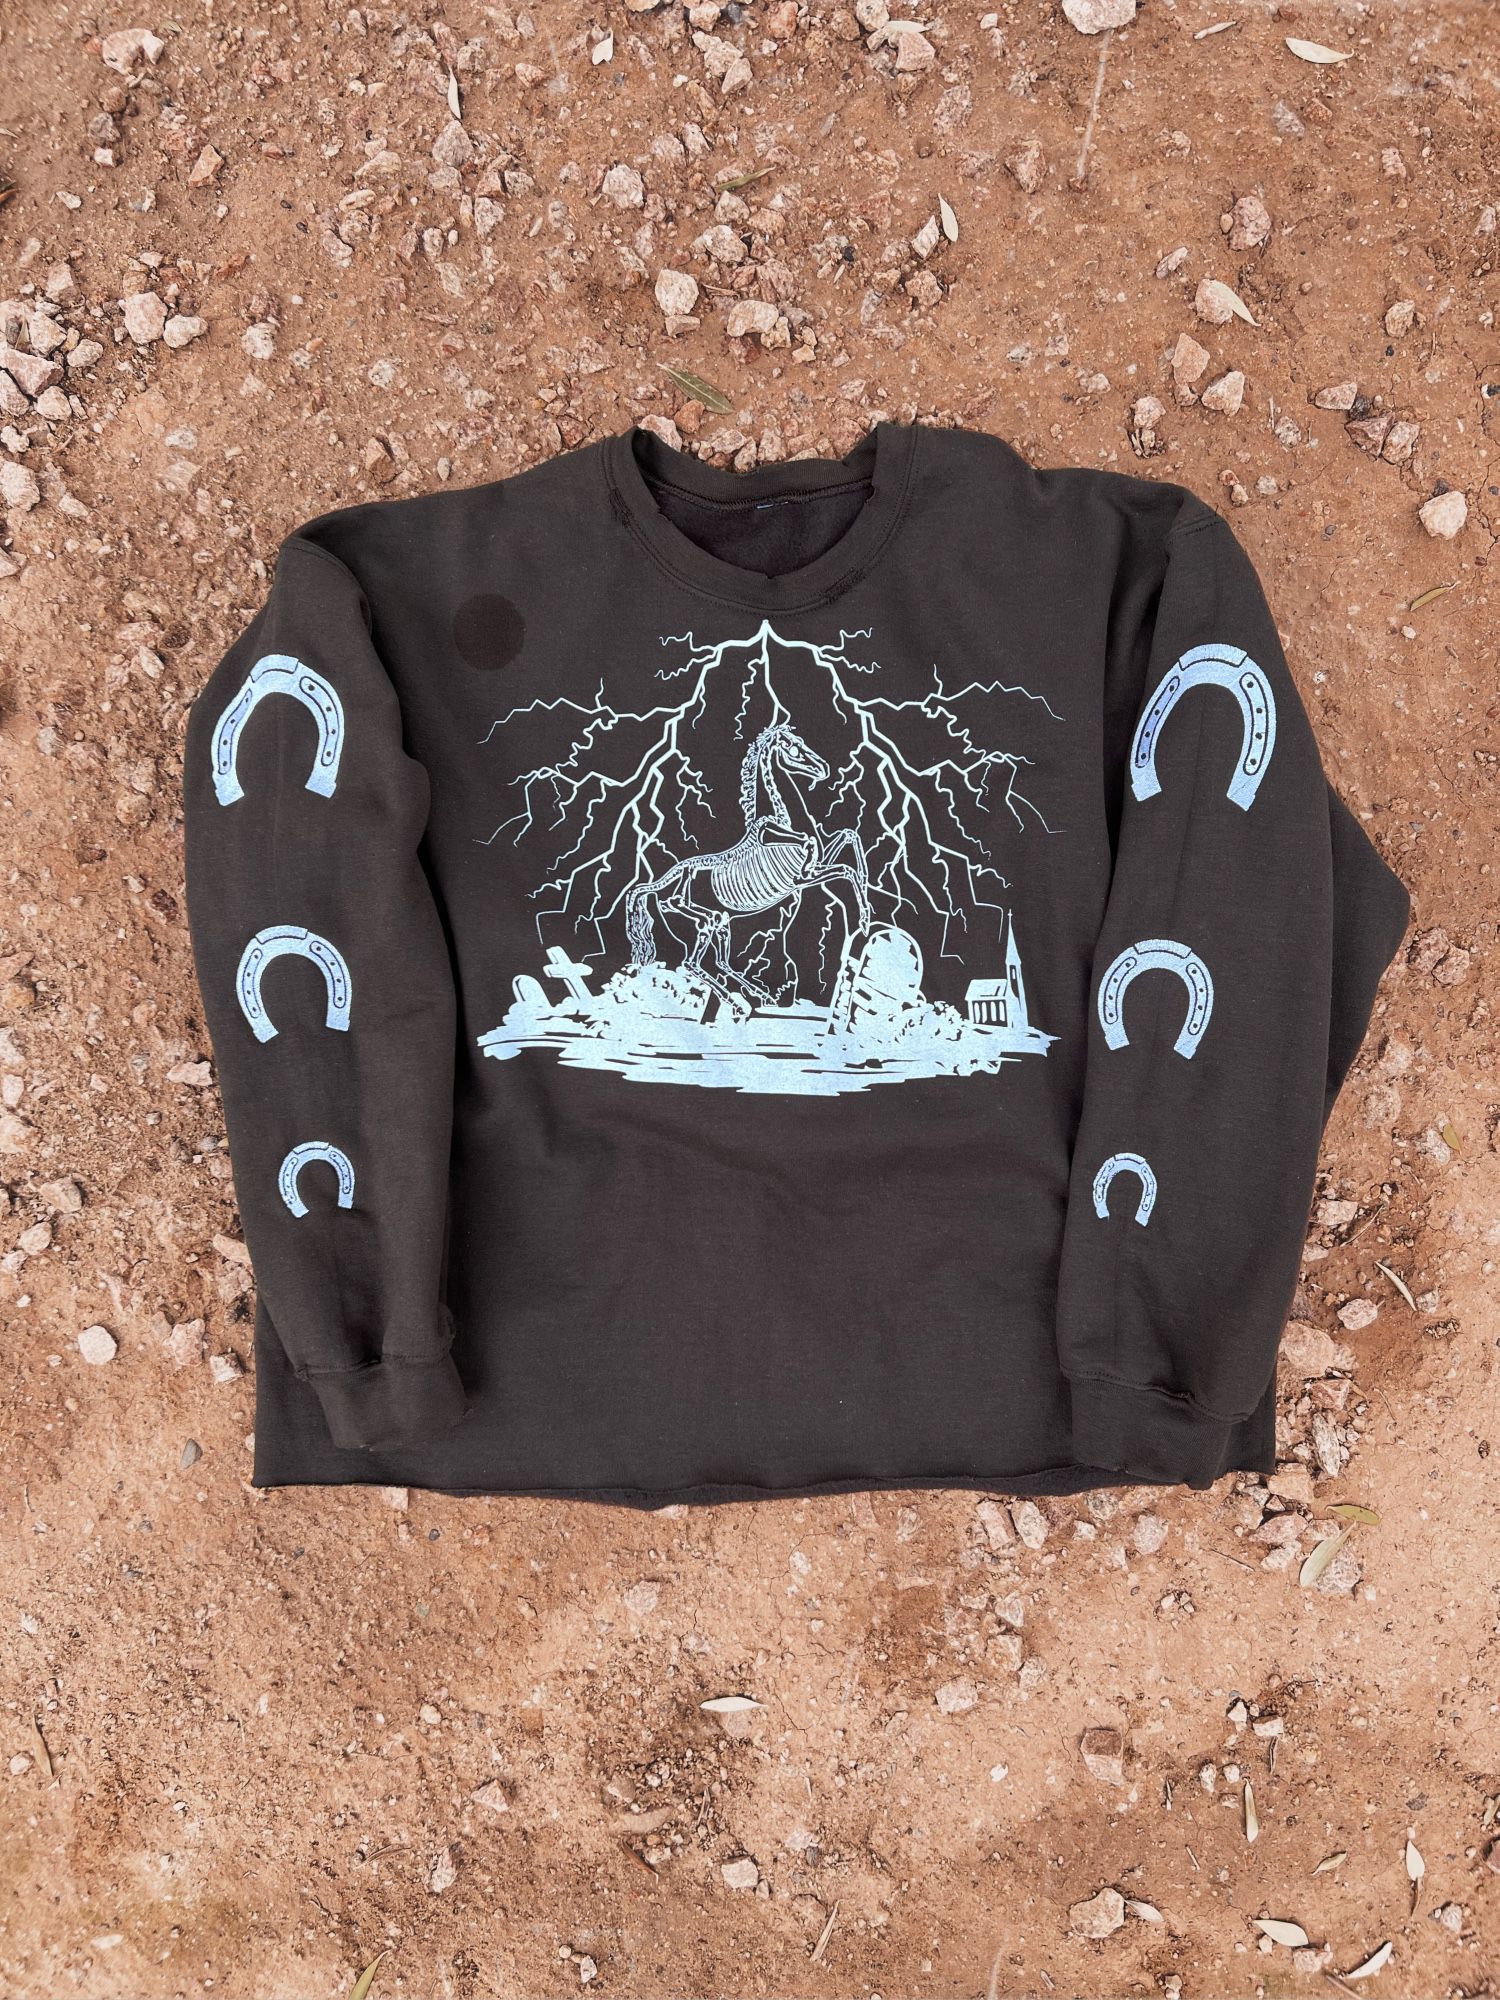 Horses Don’t Stop Oversized Crewneck S-XL By LoudPack Gear